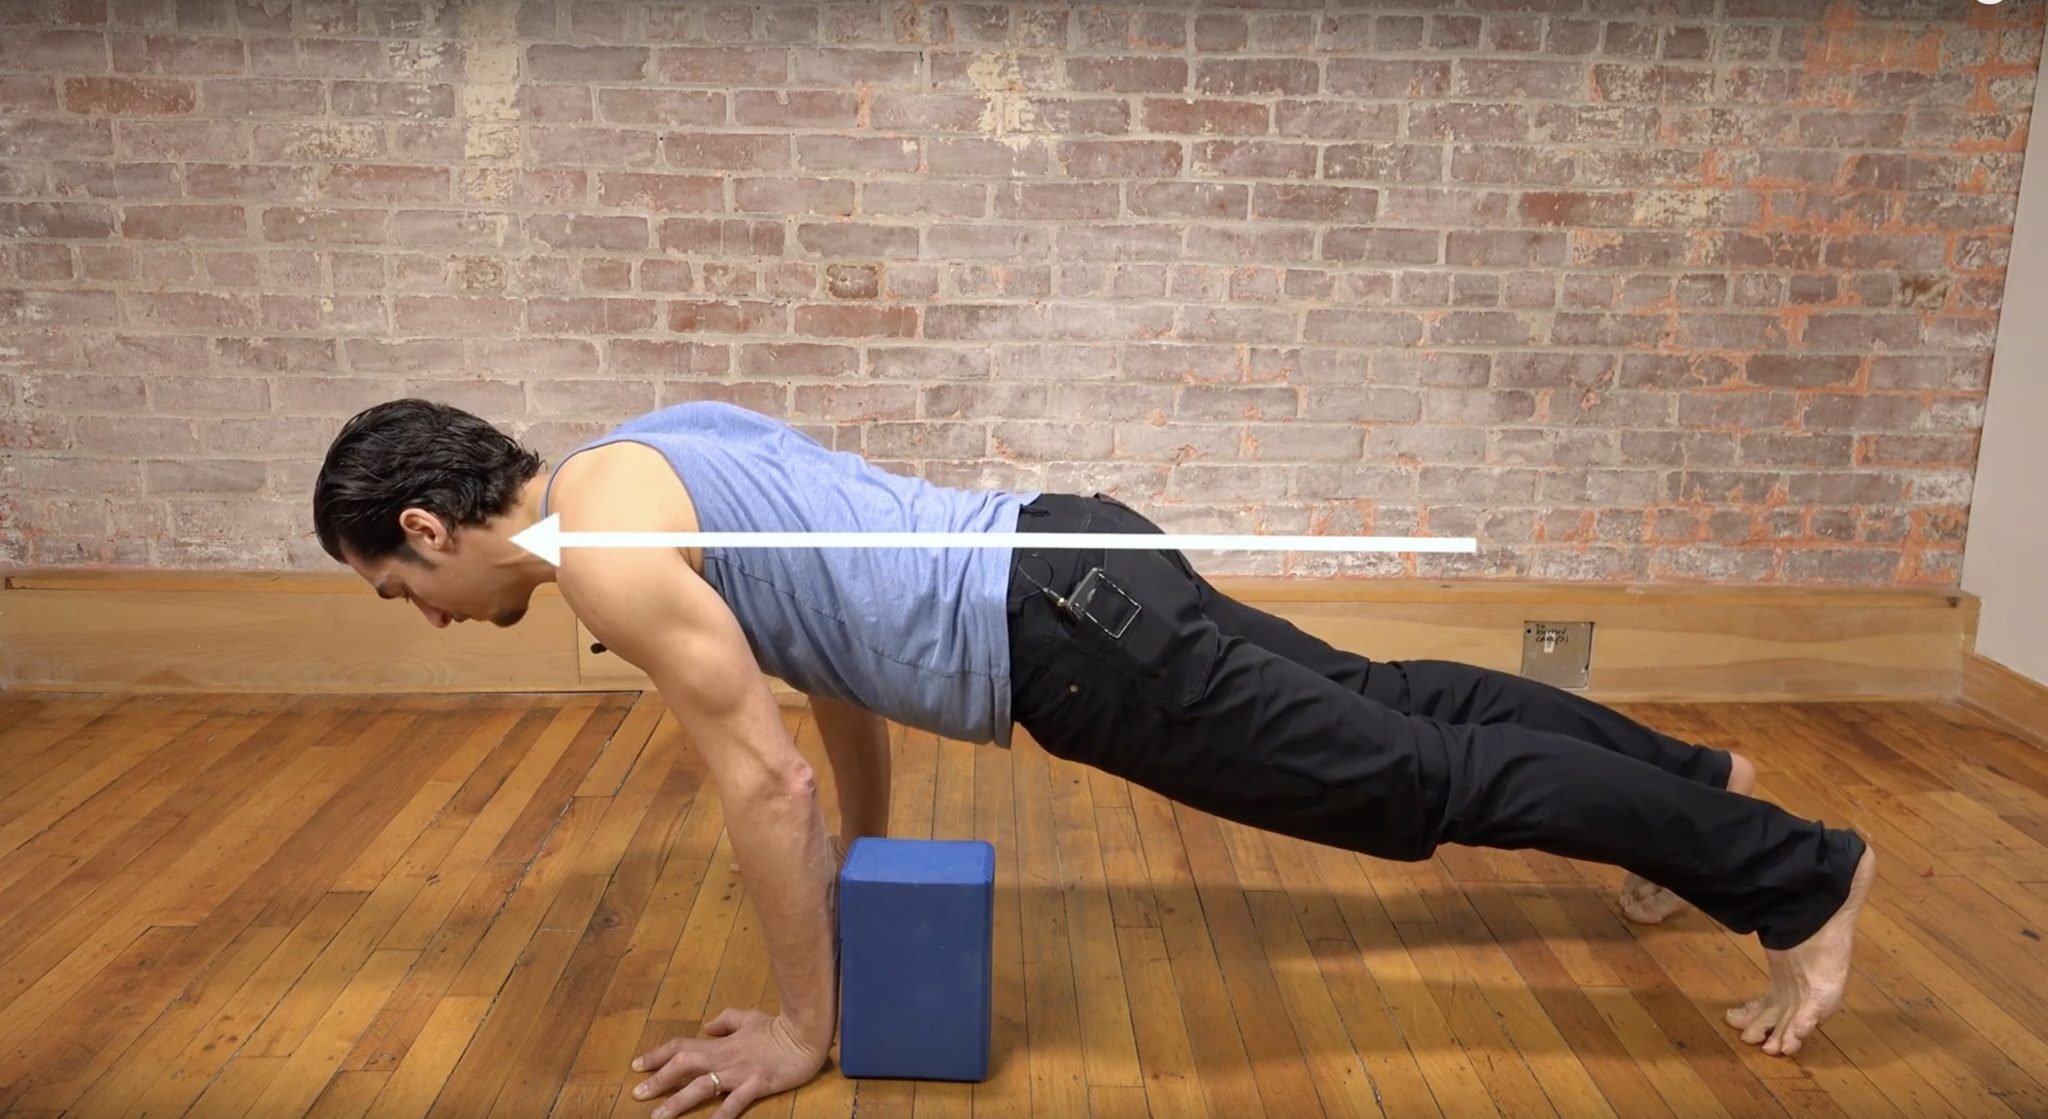 What Is The Right Alignment In Chaturanga? - Yoganatomy